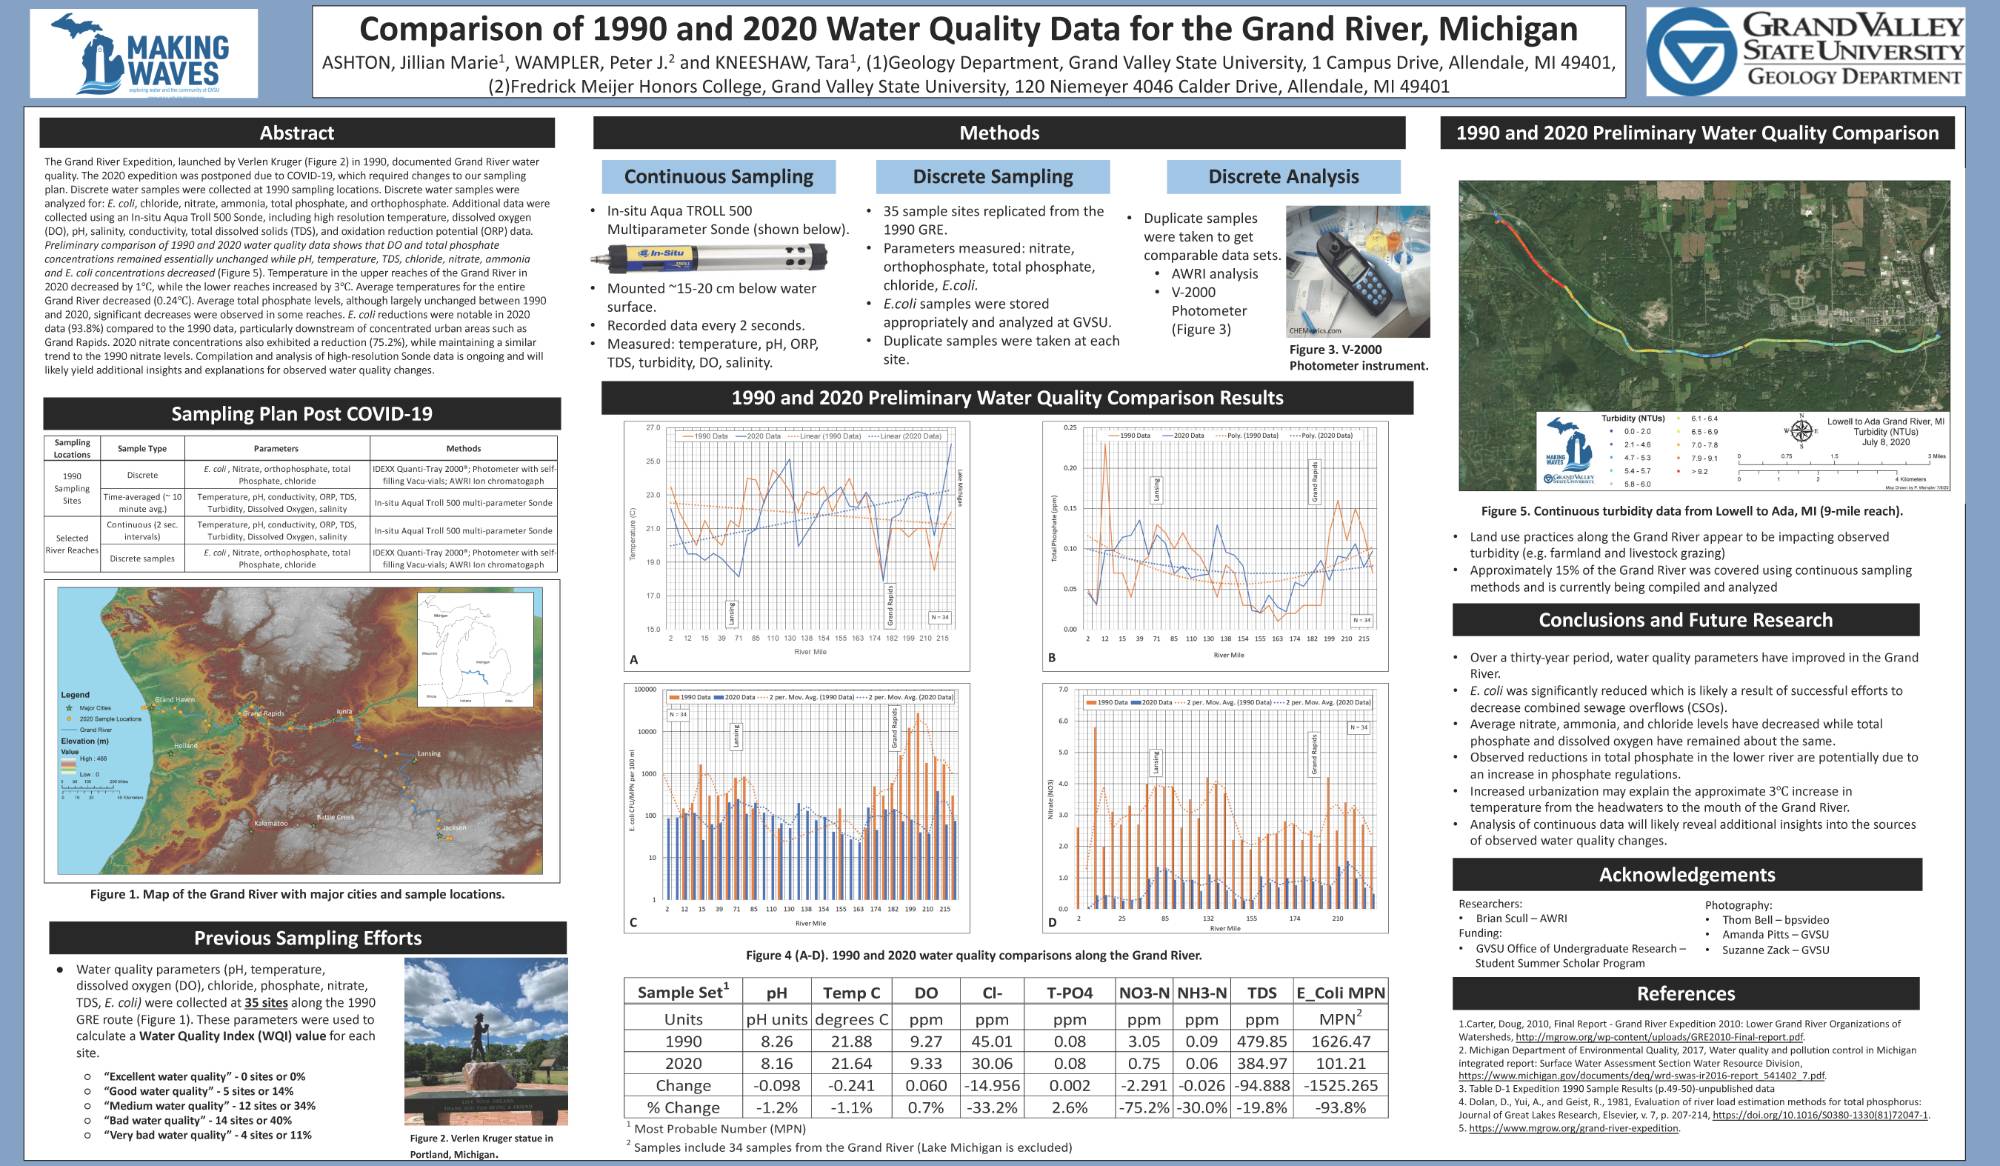 Comparison of 1990 and 2020 Water Quality Data for the Grand River, Michigan